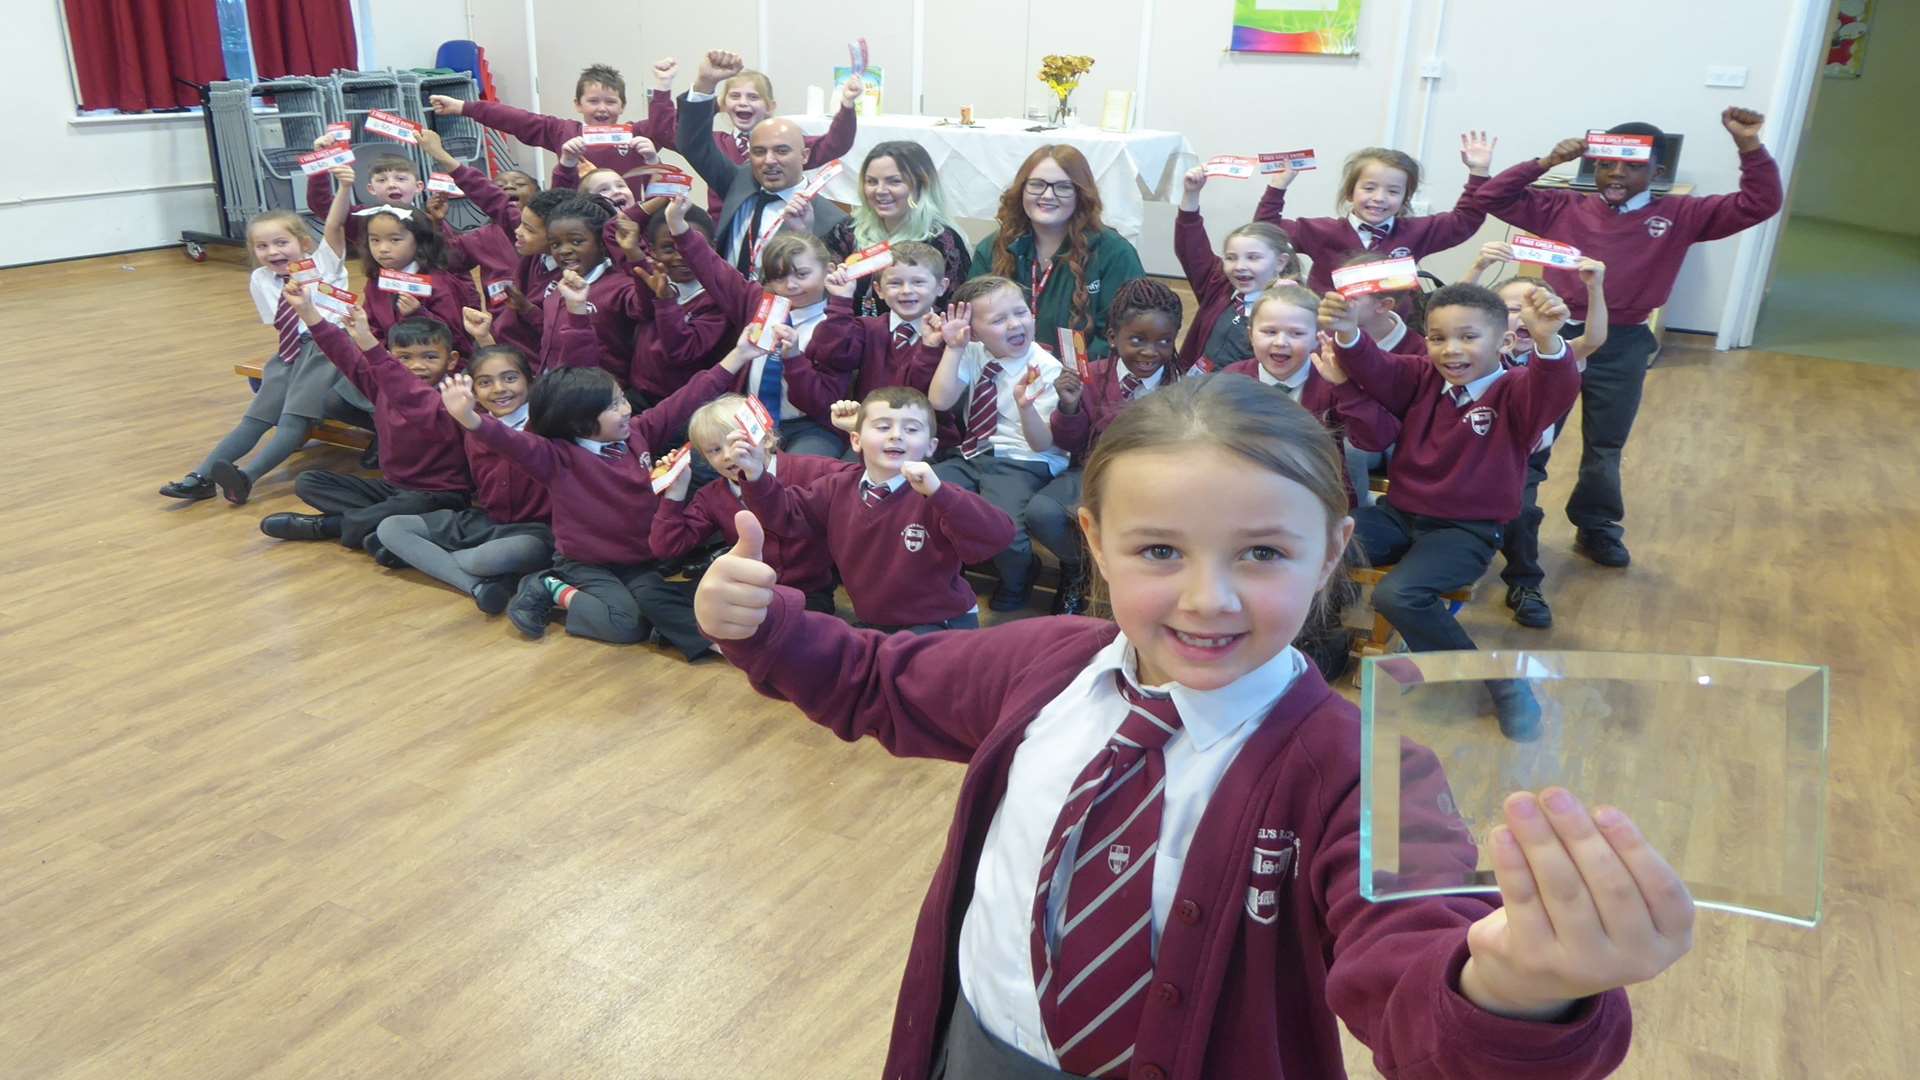 Hollie Scrivener, 7, and St Matthew Class celebrate being walk to school class of the week at St Michael's School, Chatham.